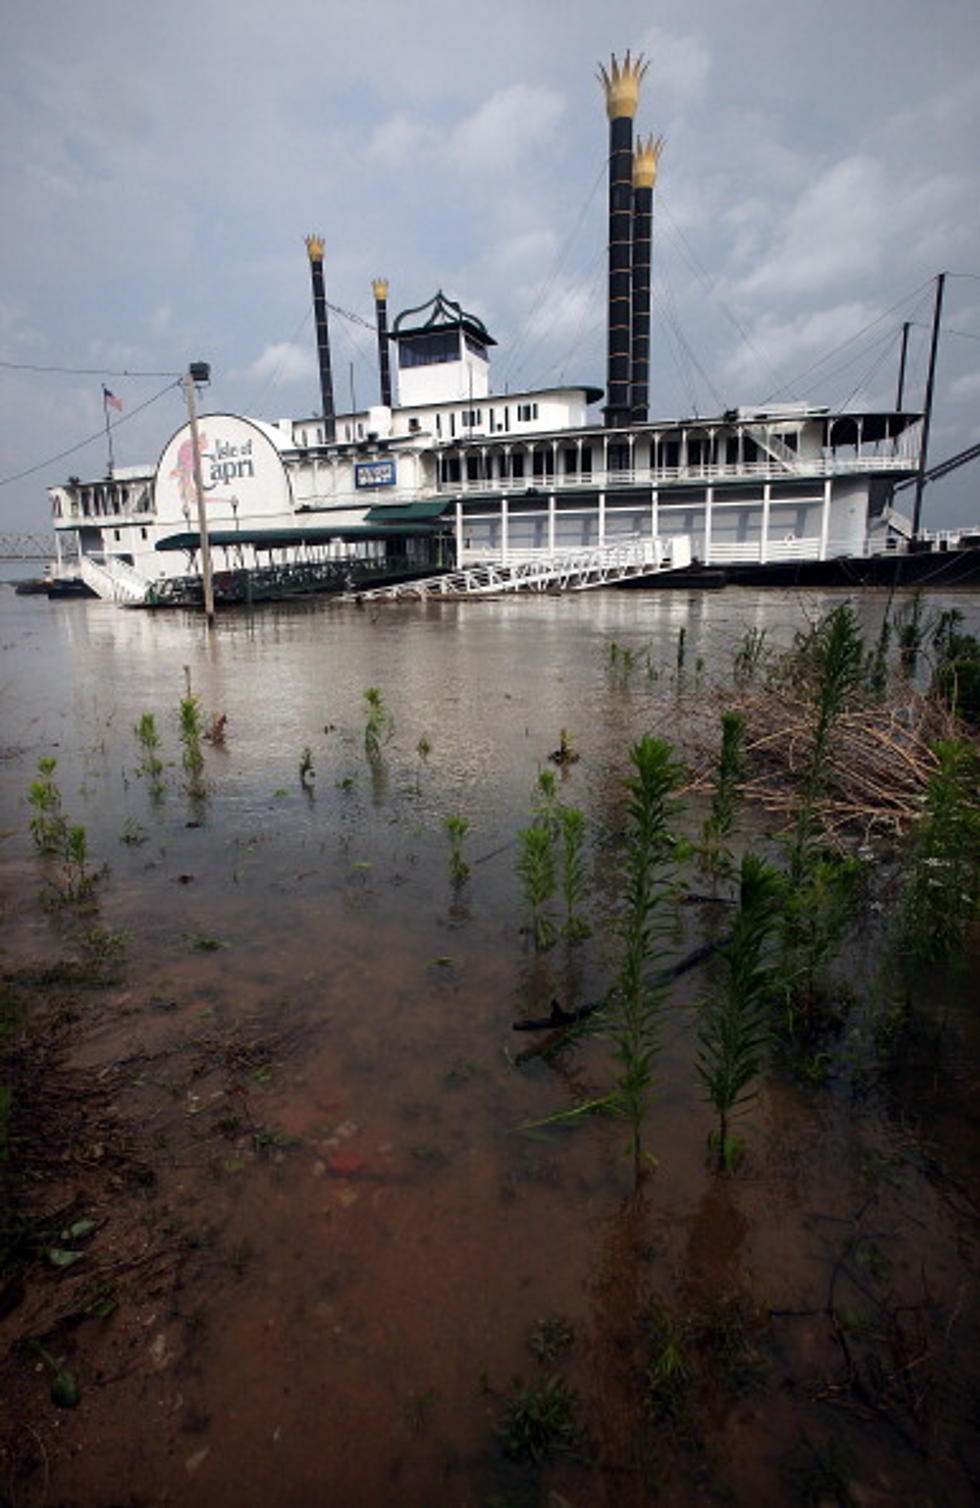 When Will Riverboat Casinos Be Allowed To Move Ashore?